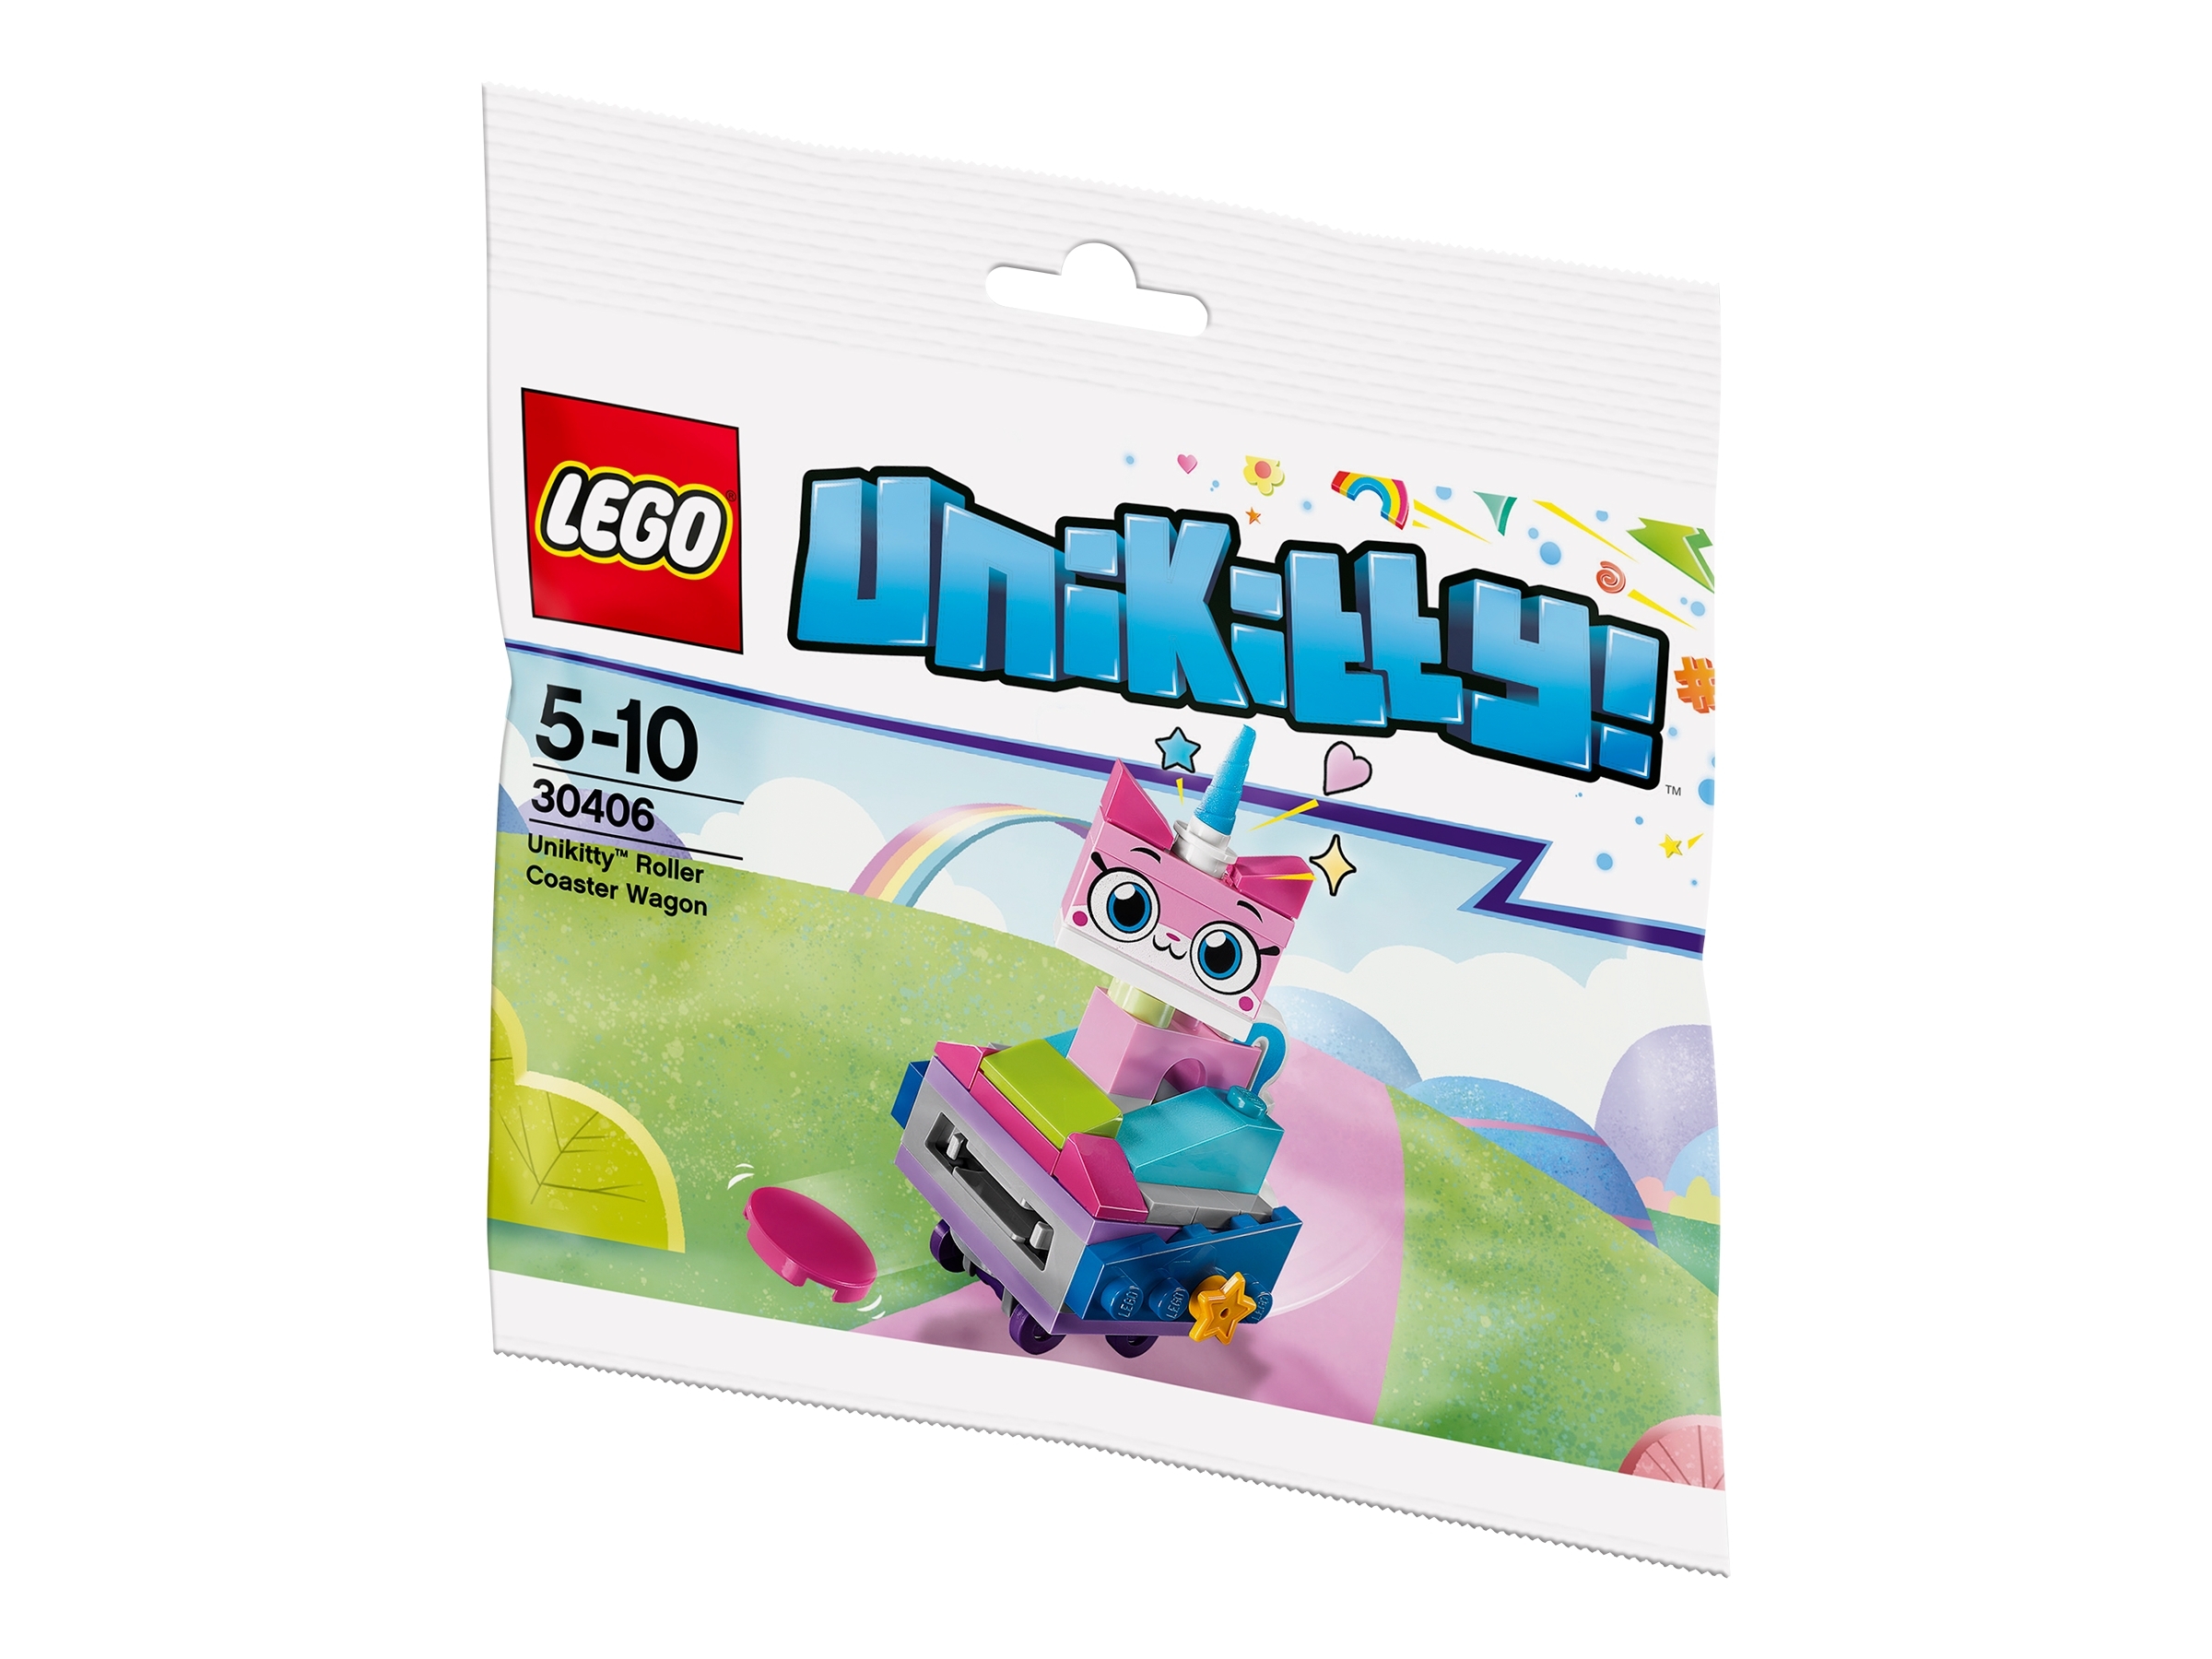 Details about  / LEGO Unikitty Roller Coaster Wagon Set 30406 Brand New Sealed in Bag Lot Of 5